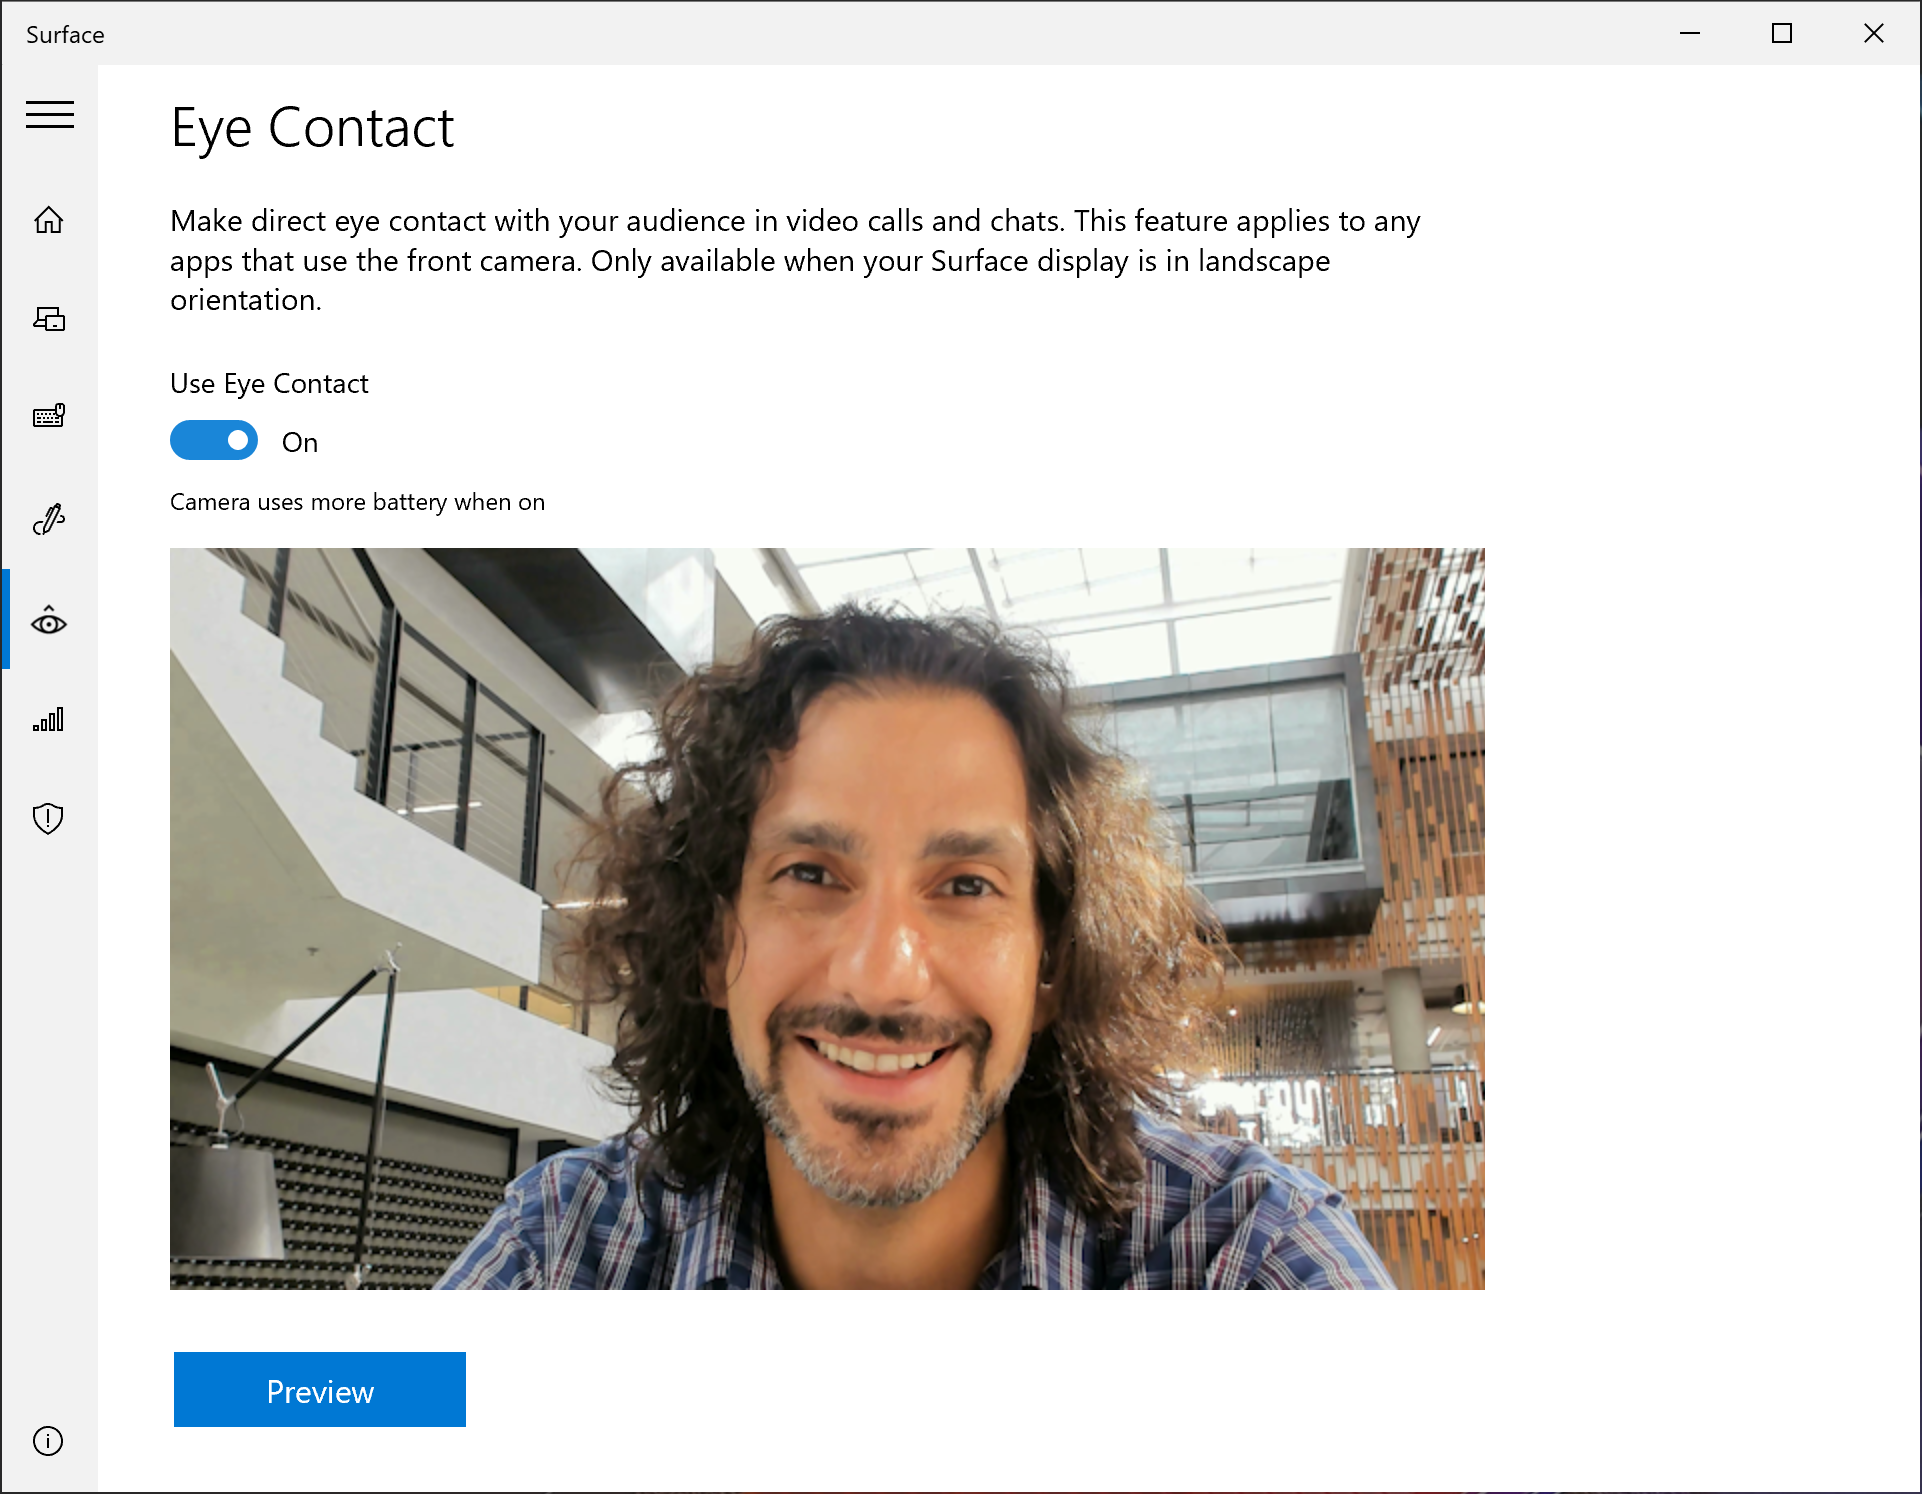 Turn on Eye Contact on the Surface Pro X via the Surface app.